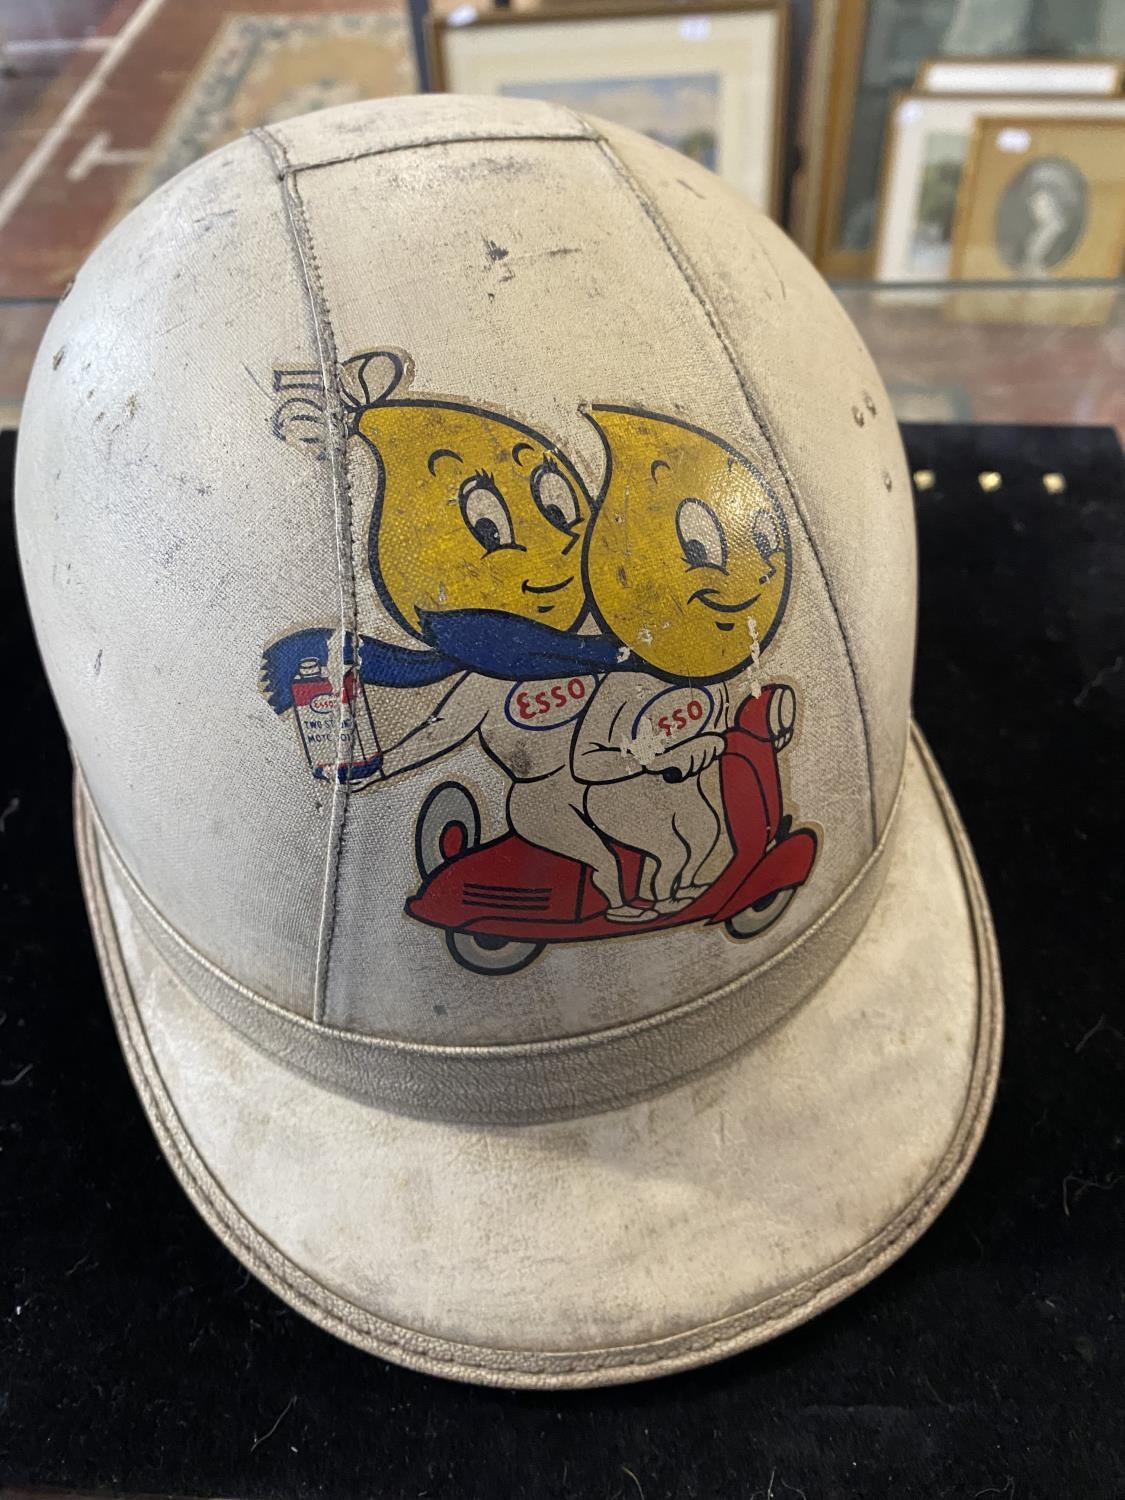 A vintage Everoak scooter helmet with Esso decal